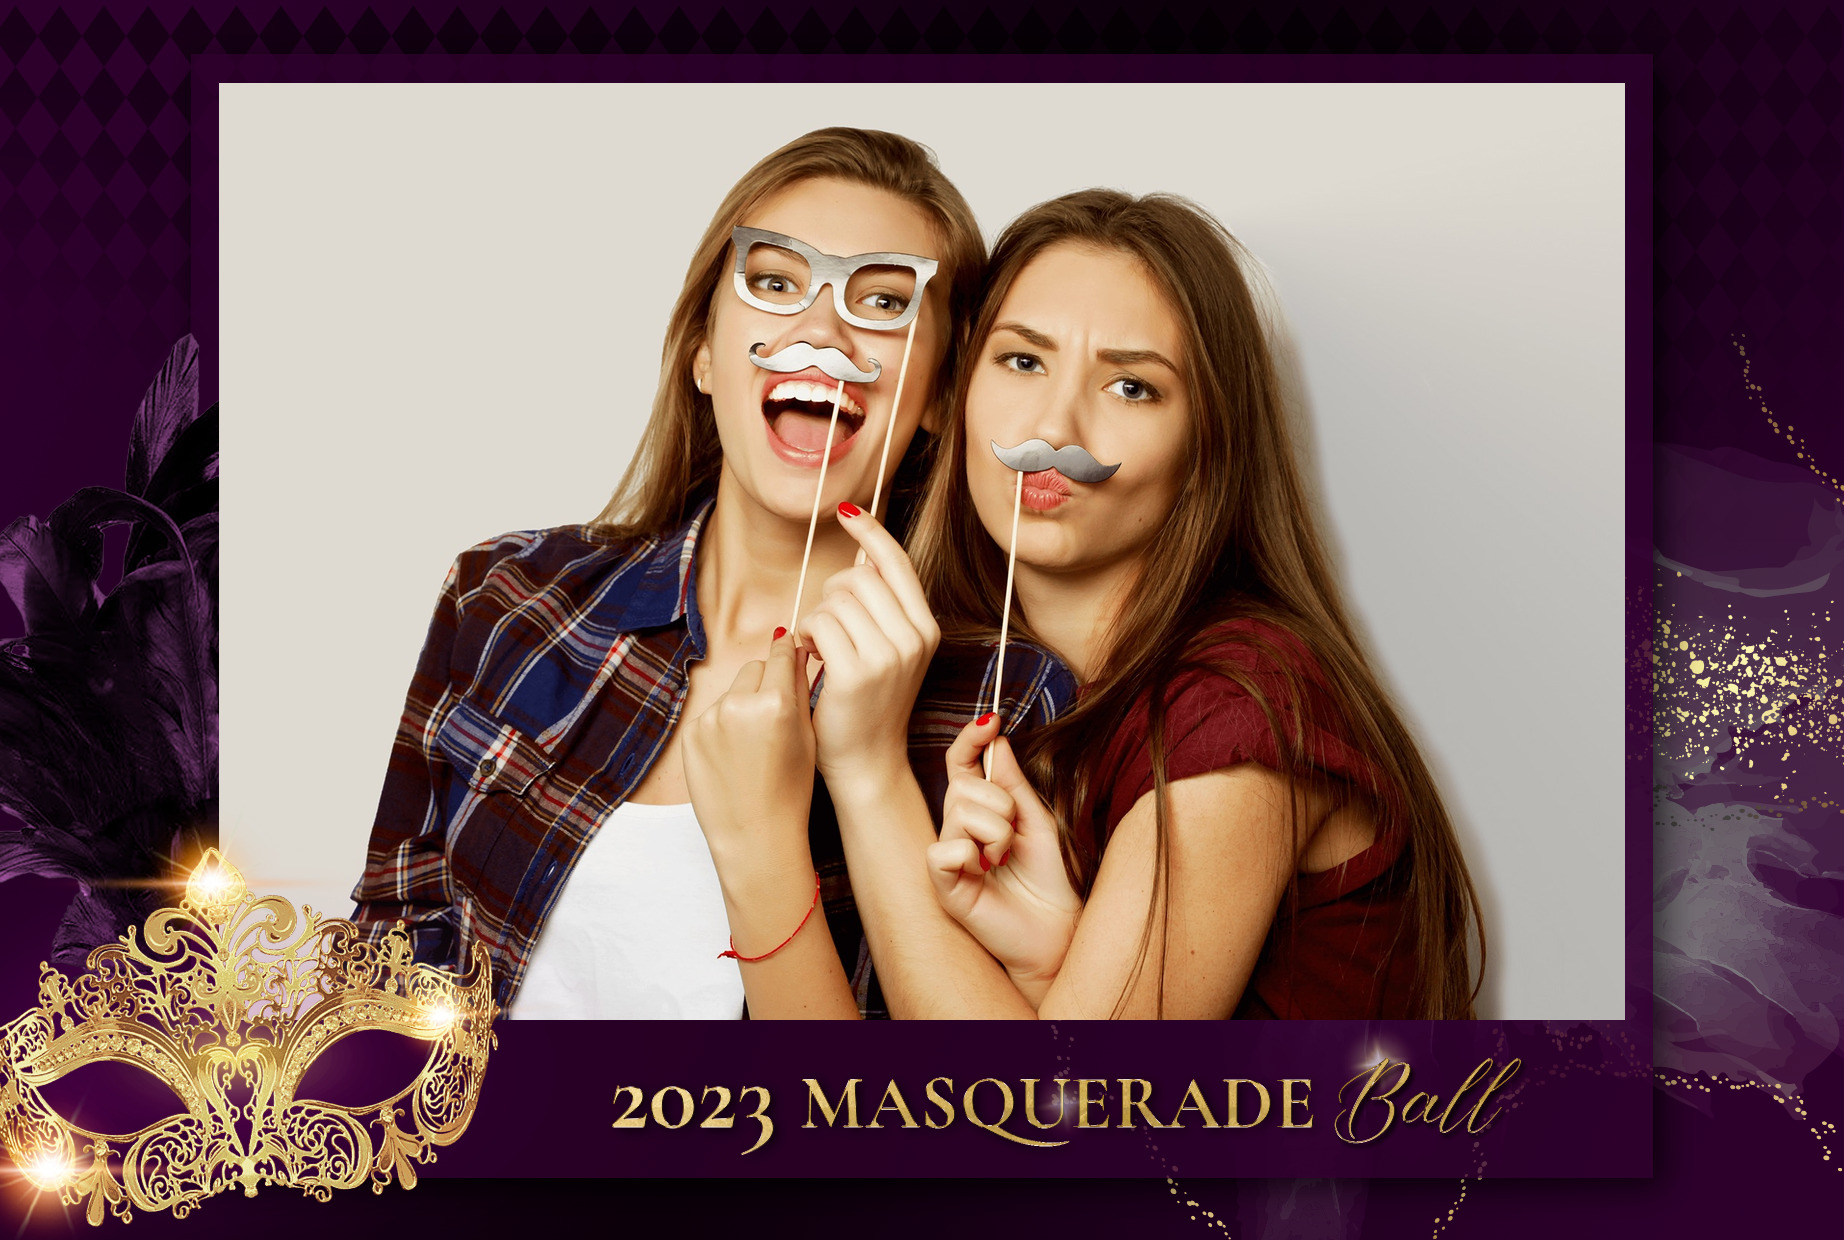 Sample photo from a masquerade ball themed prom